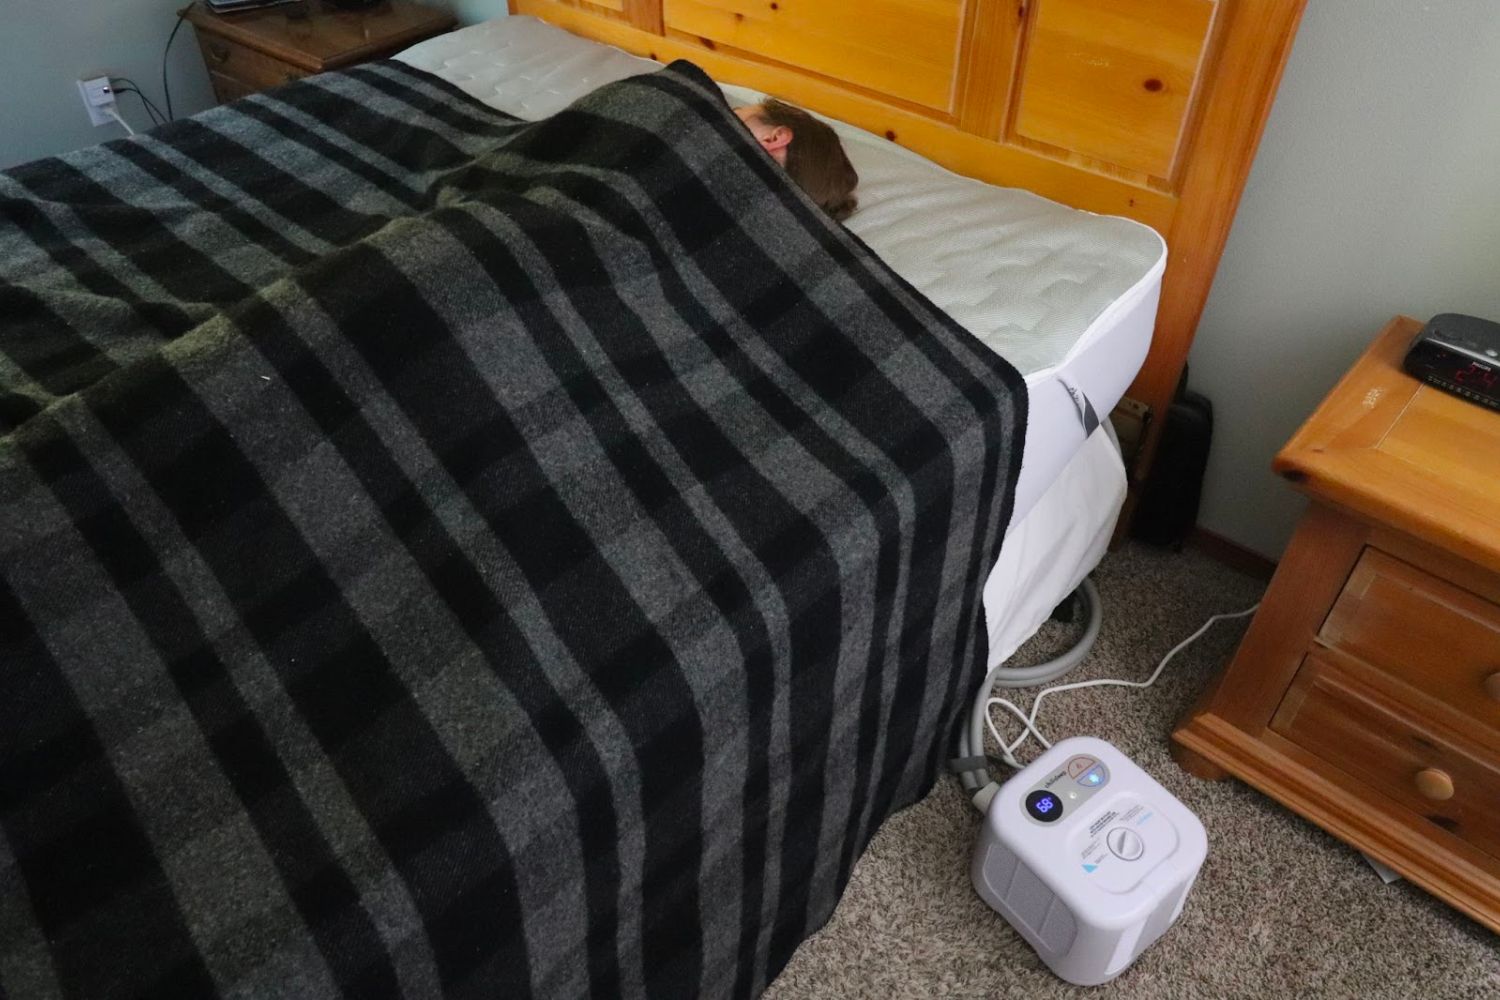 A person under a plaid blanket in a bed that has the Chilipad Sleep System installed on it.